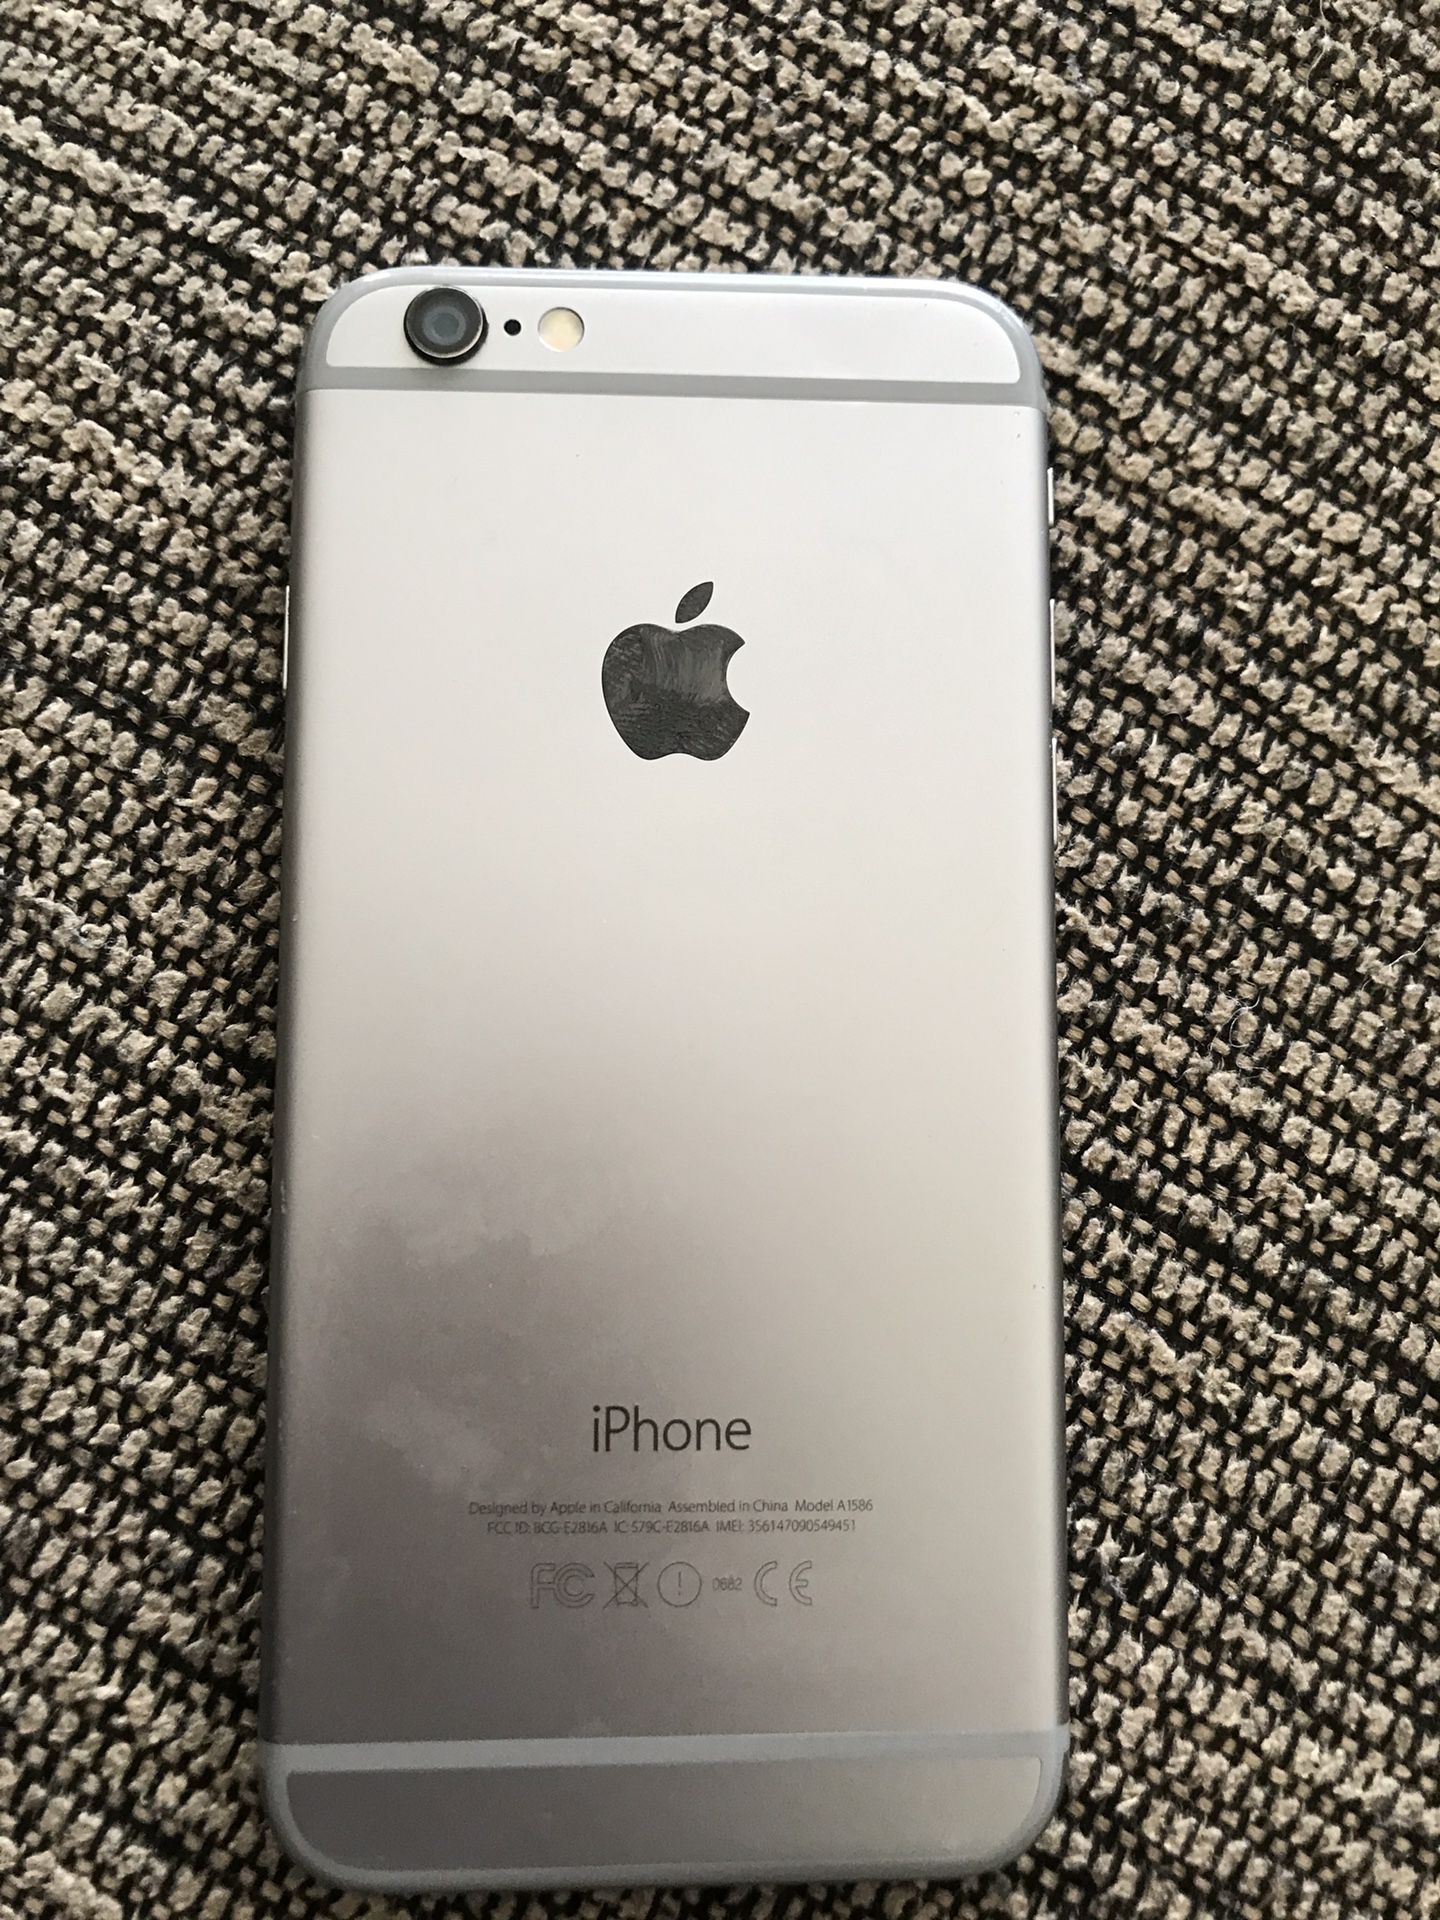 iPhone 6 For sale 150 boost mobile can be unlocked to any service iCloud is unlocked